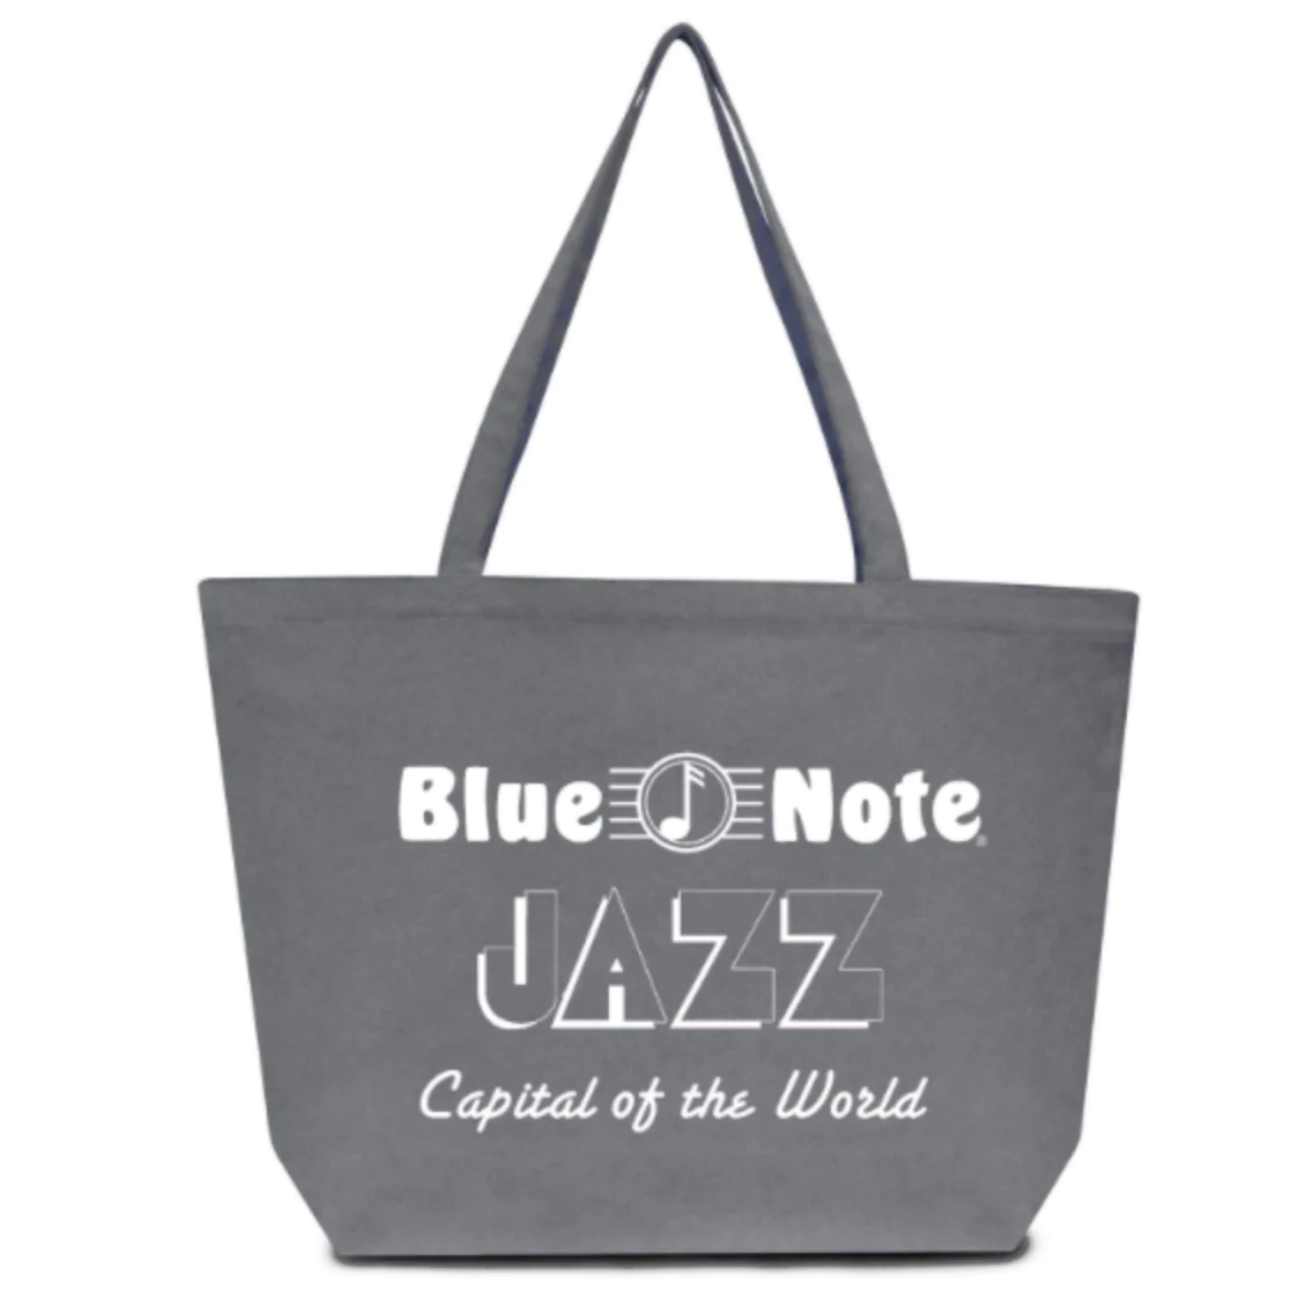 Jazz Capital of the World - Large Tote Bag